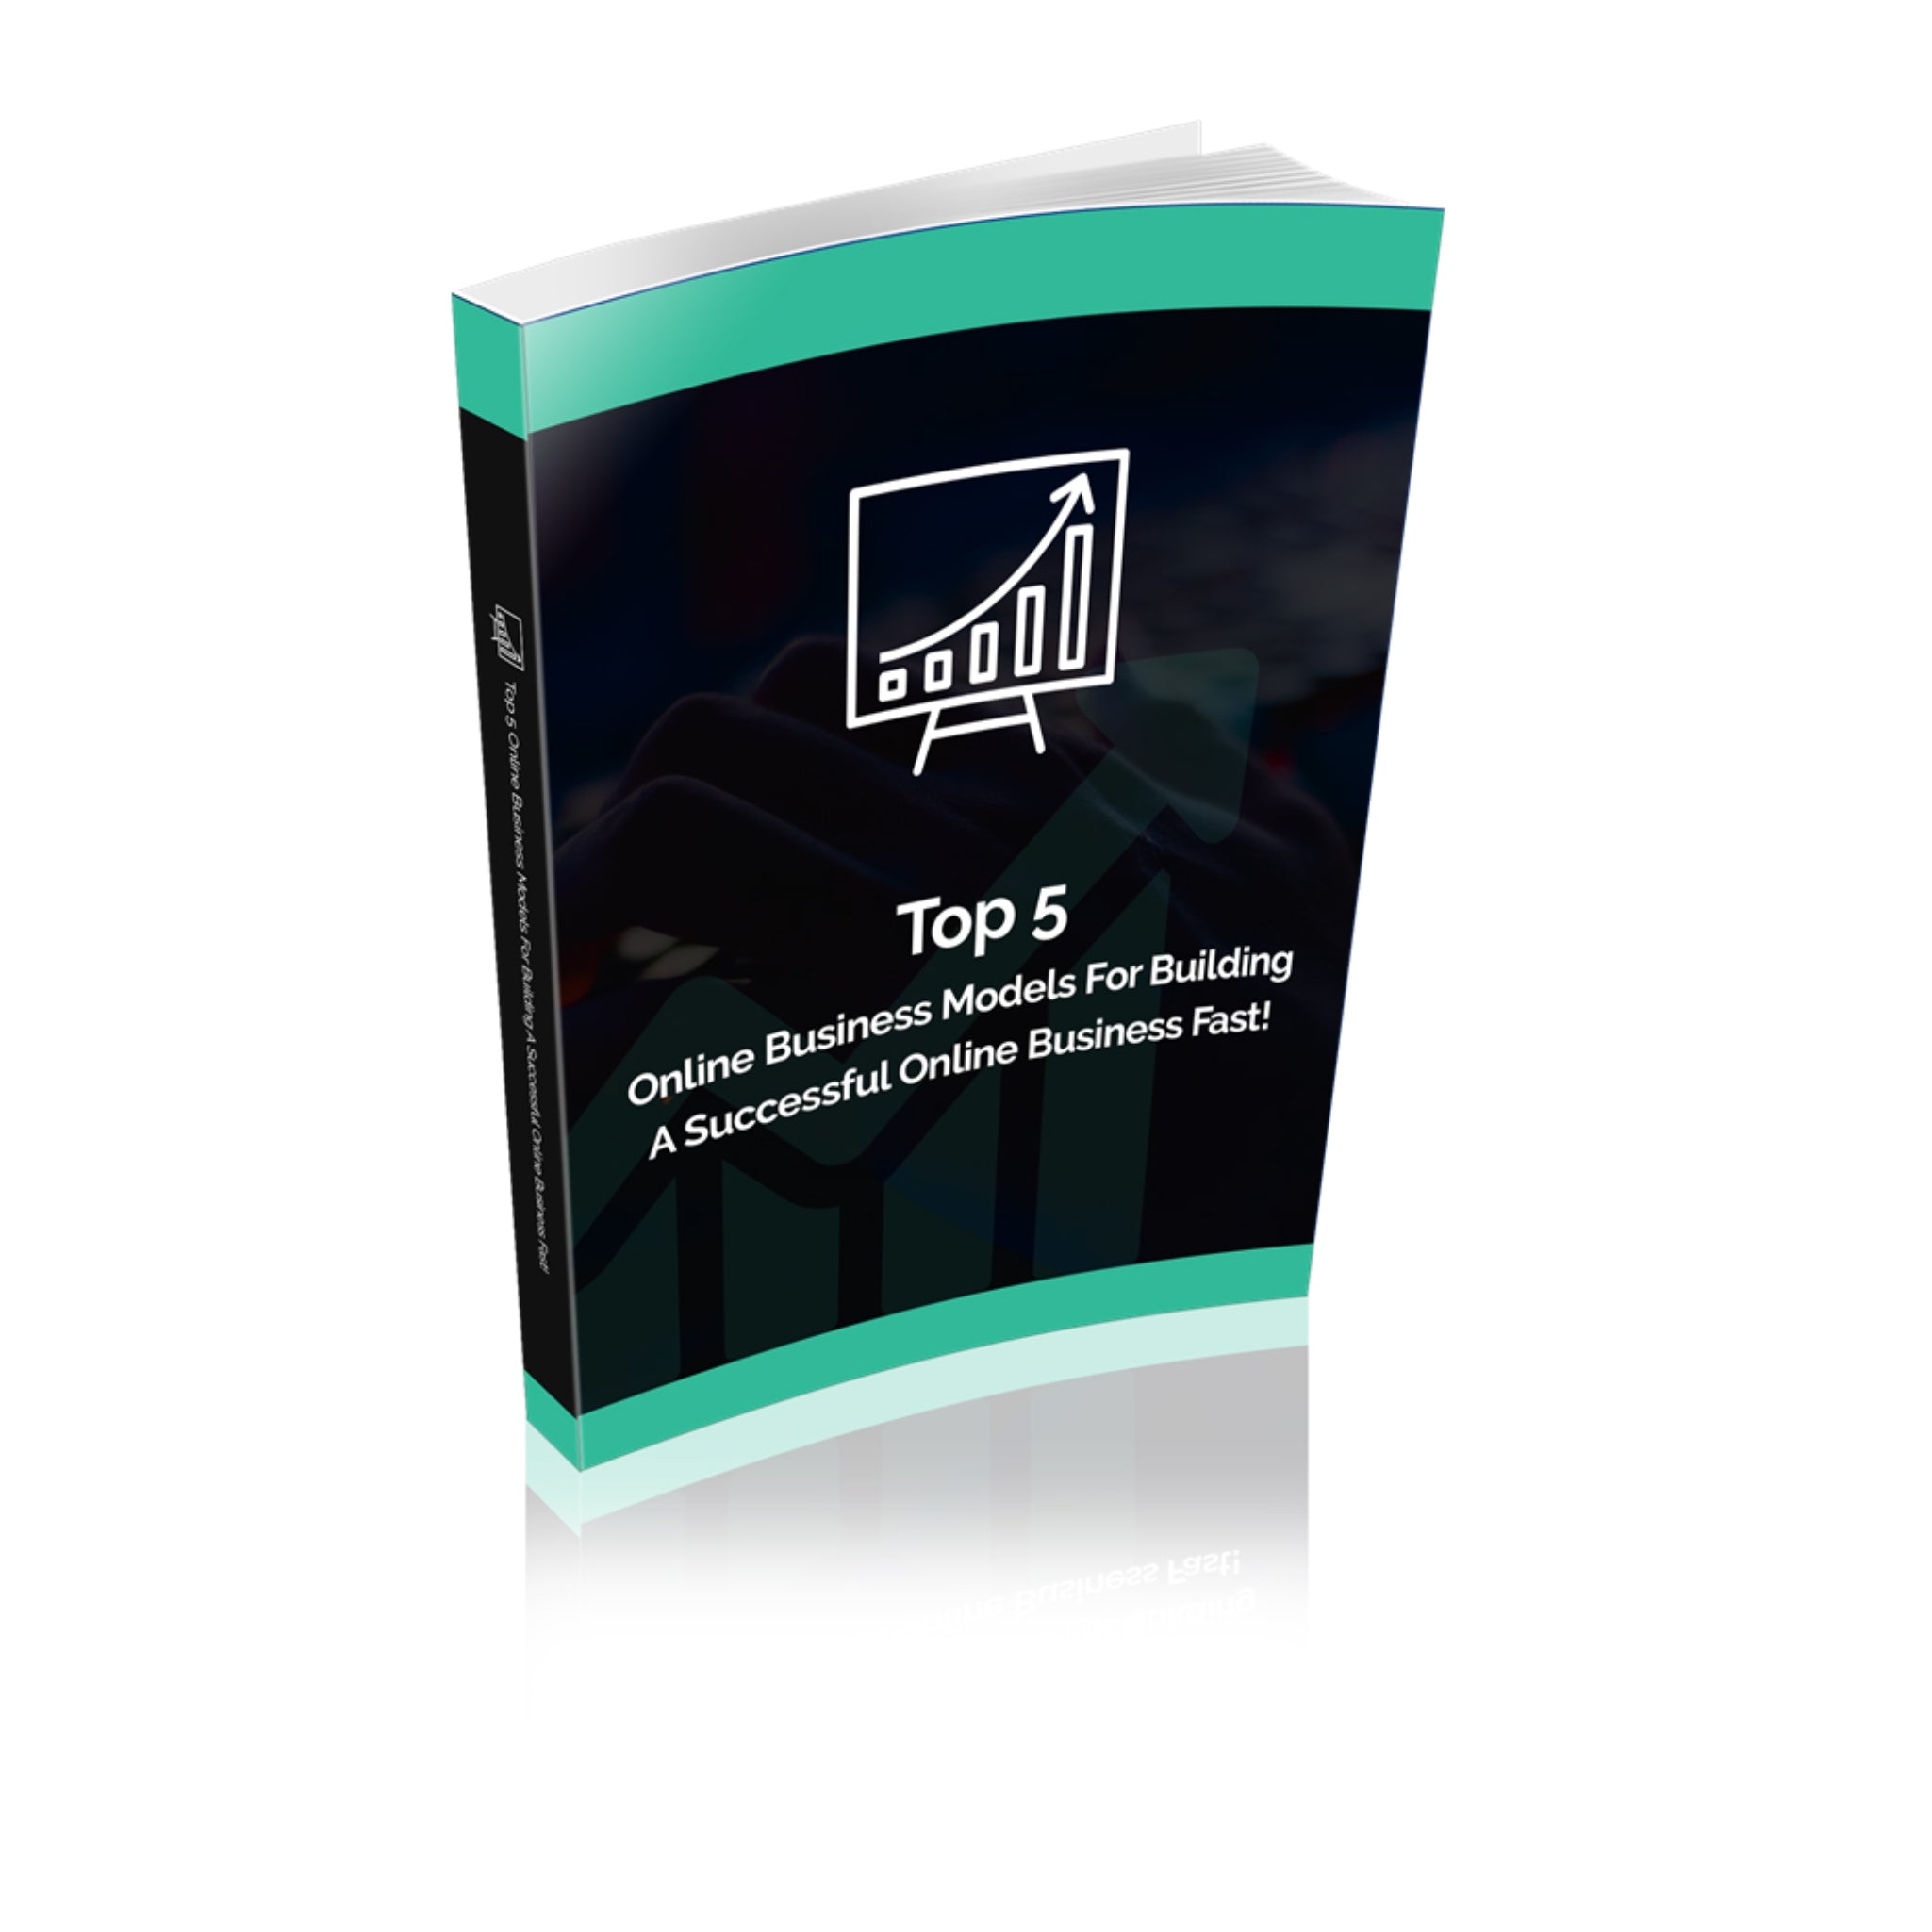 The Top 5 Online Business Models Ebook